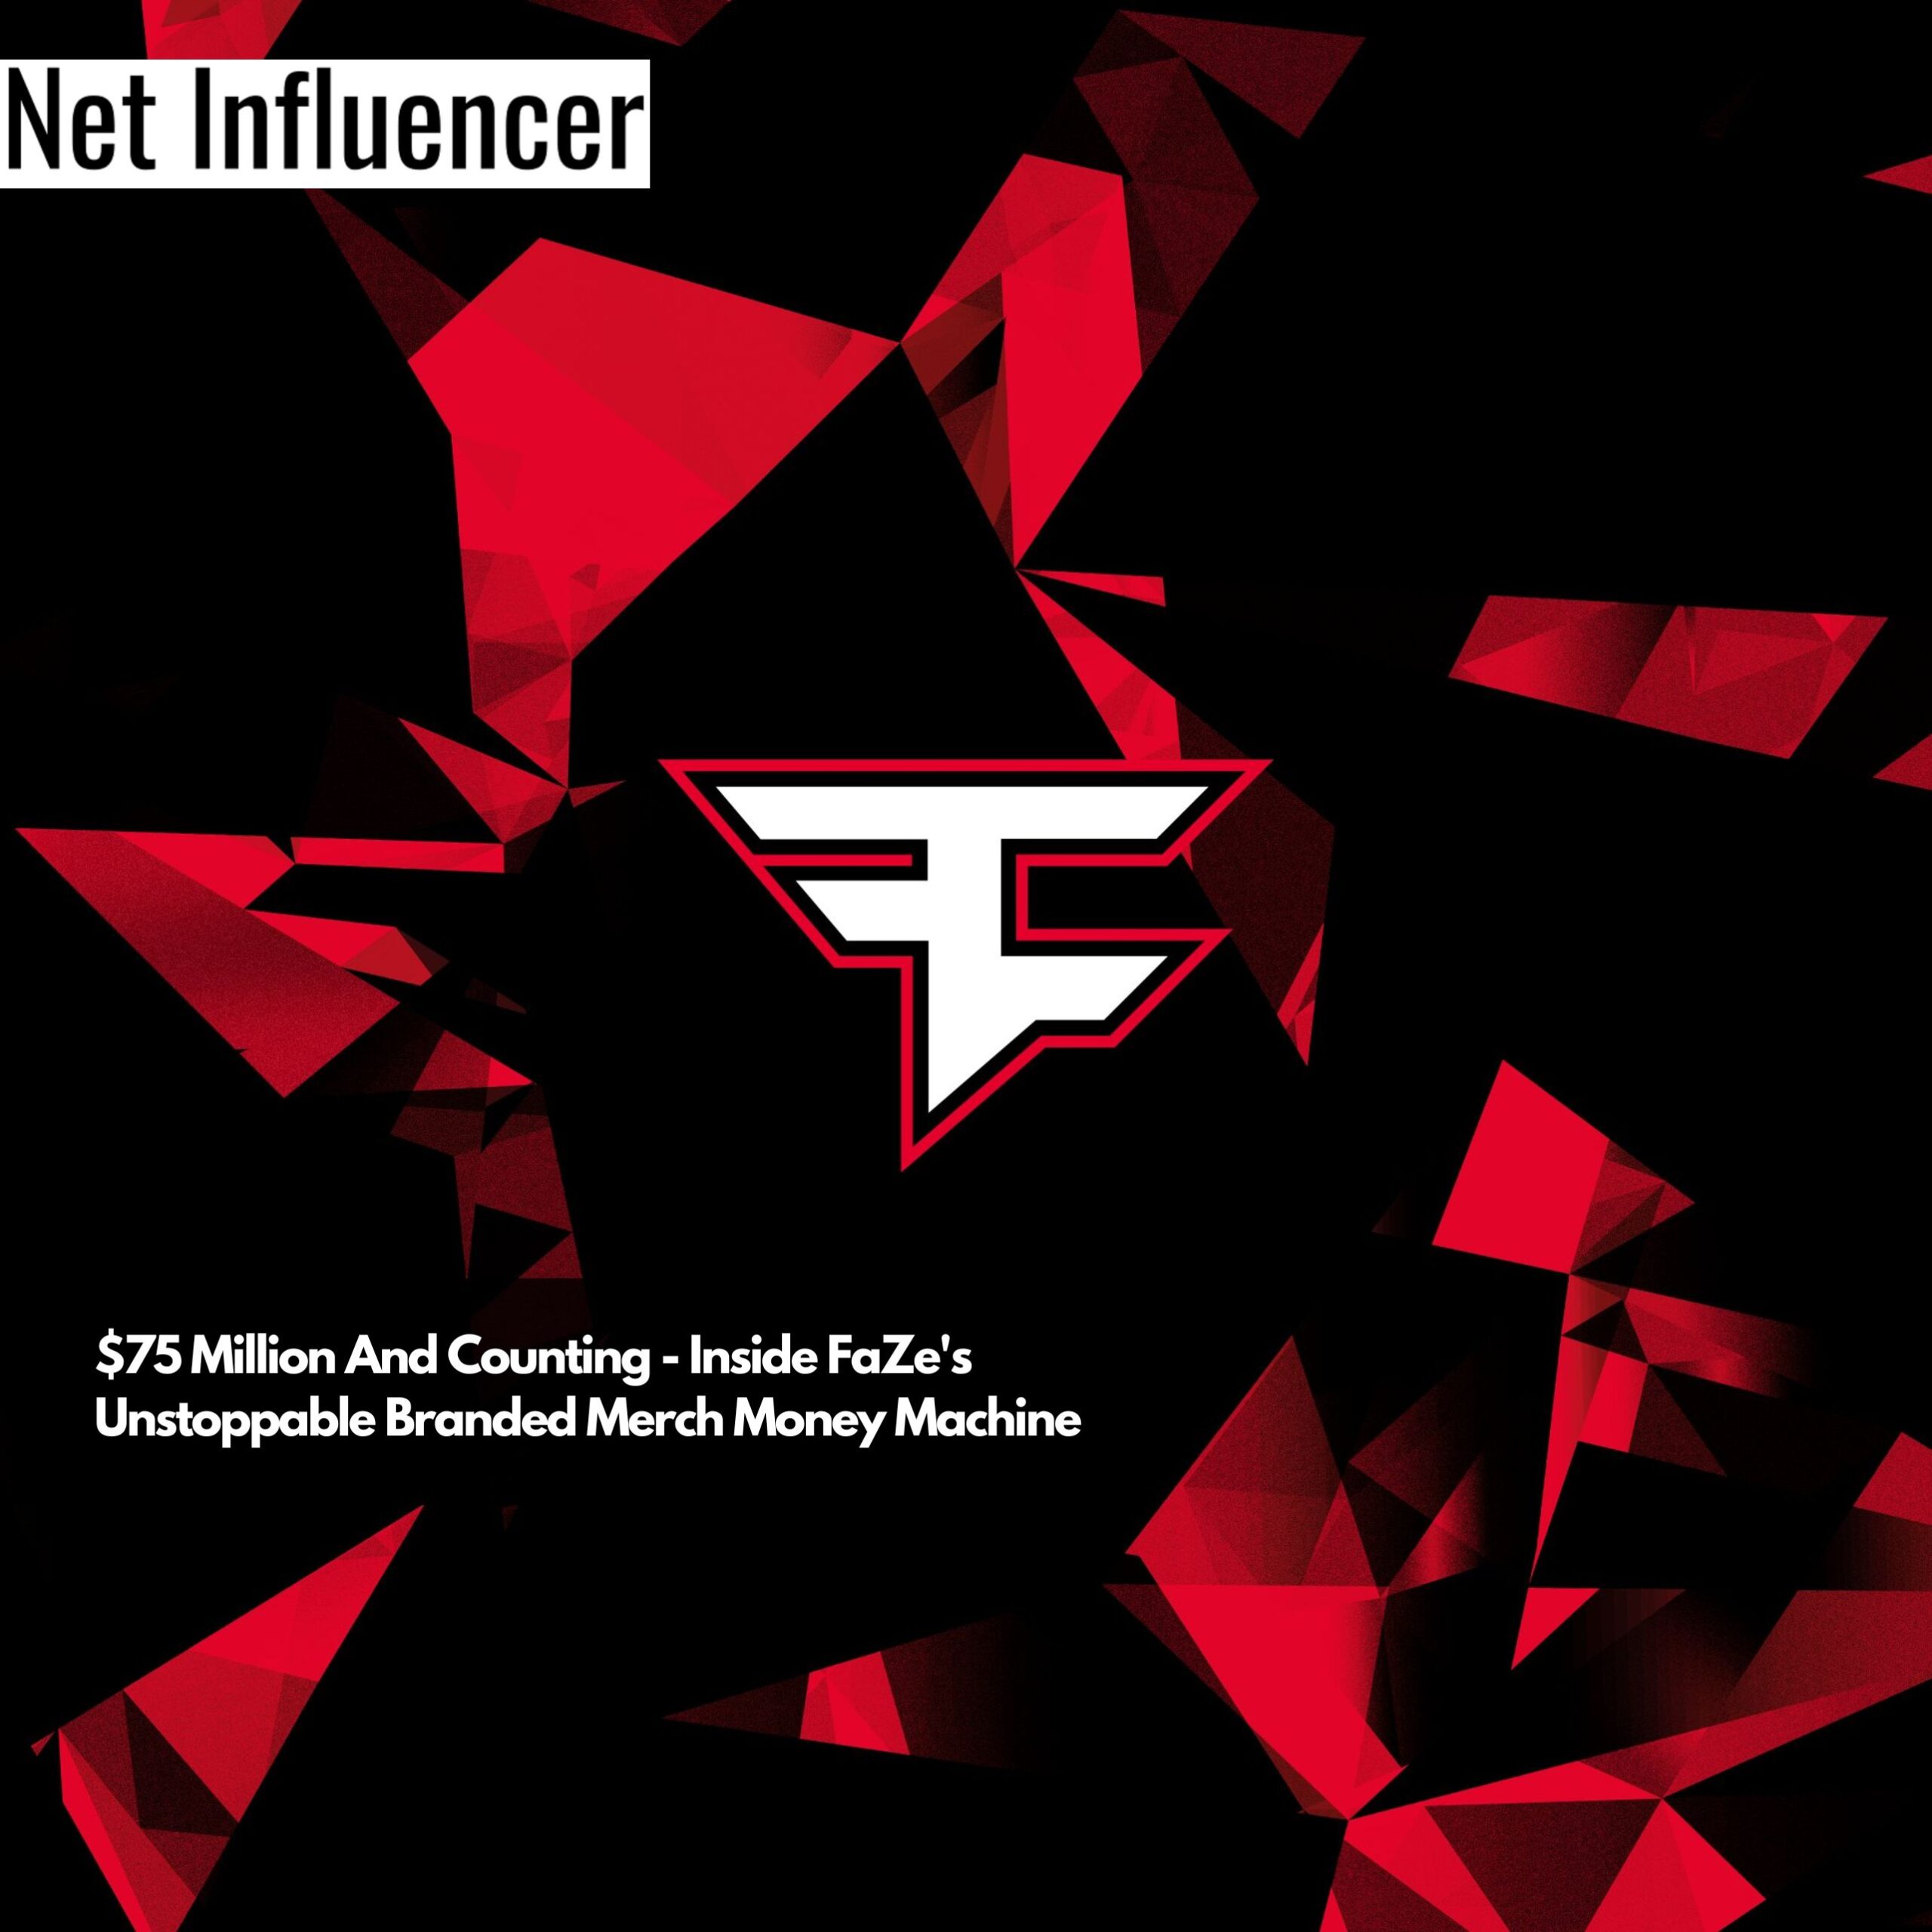 $75 Million And Counting - Inside FaZe's Unstoppable Branded Merch Money Machine